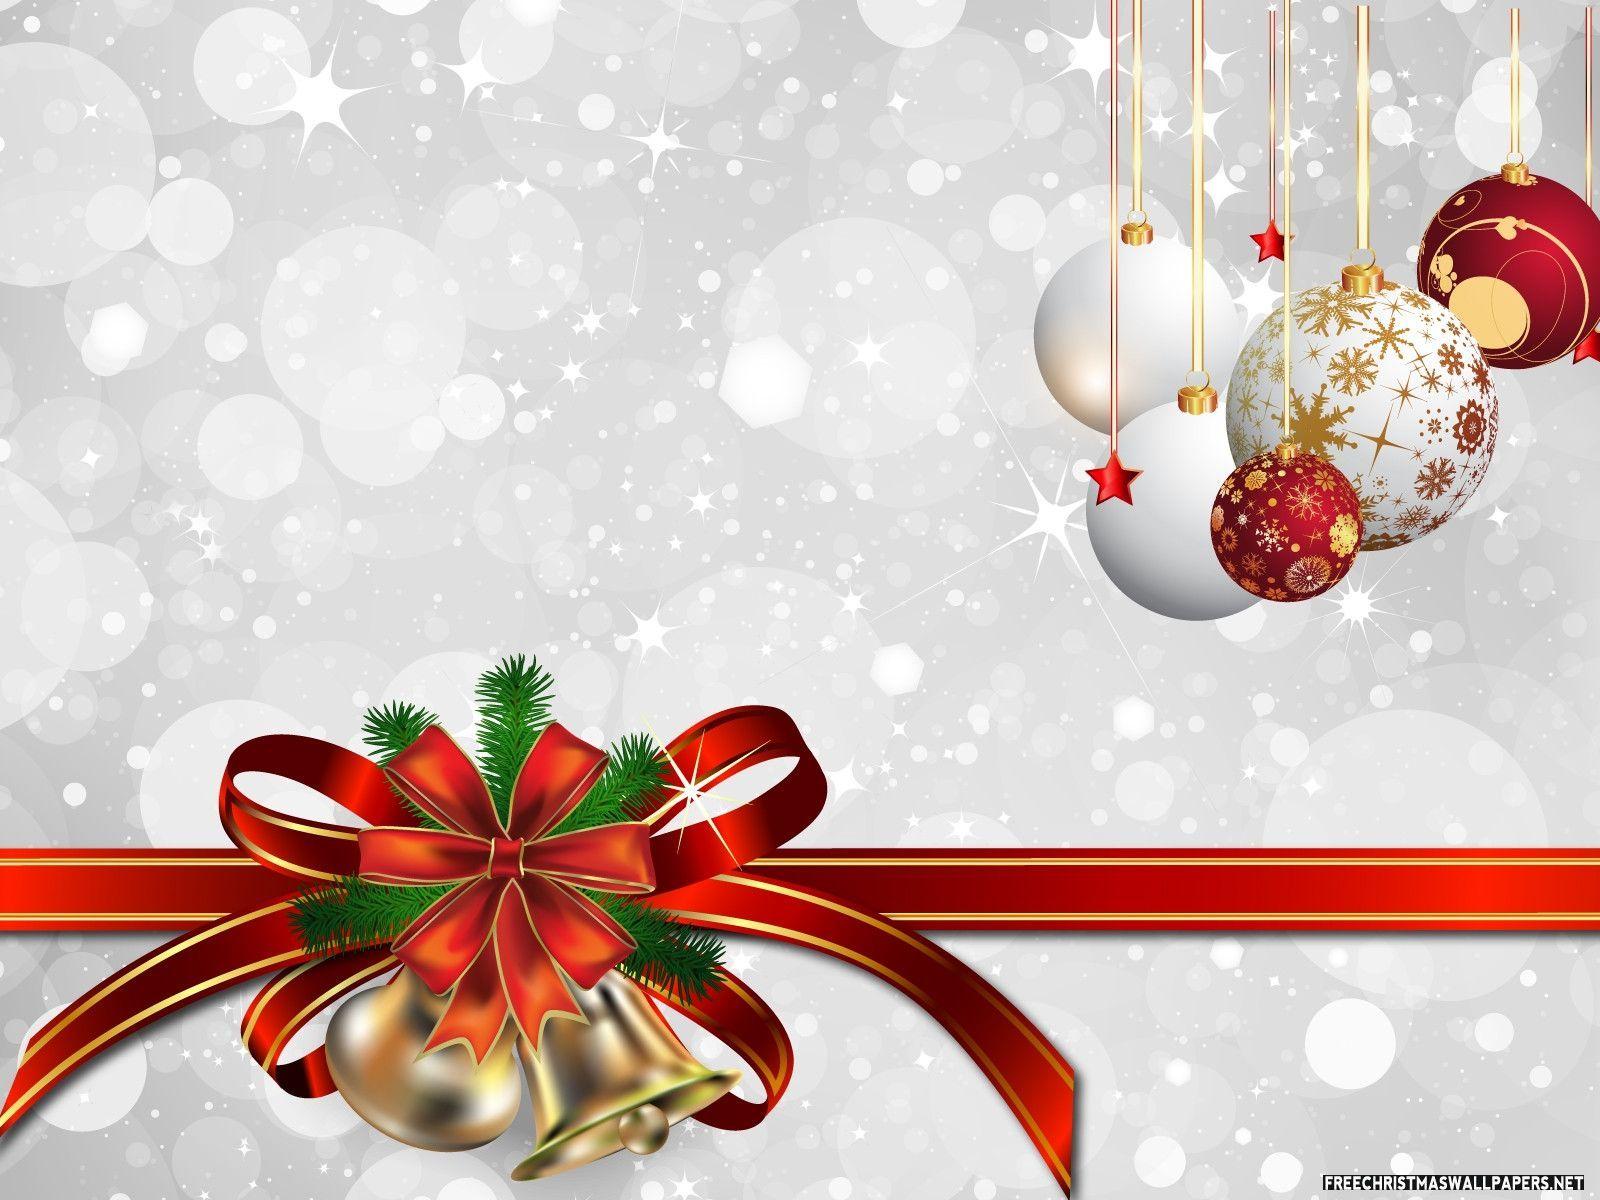 Wallpaper For > Christmas Background Image Free Download